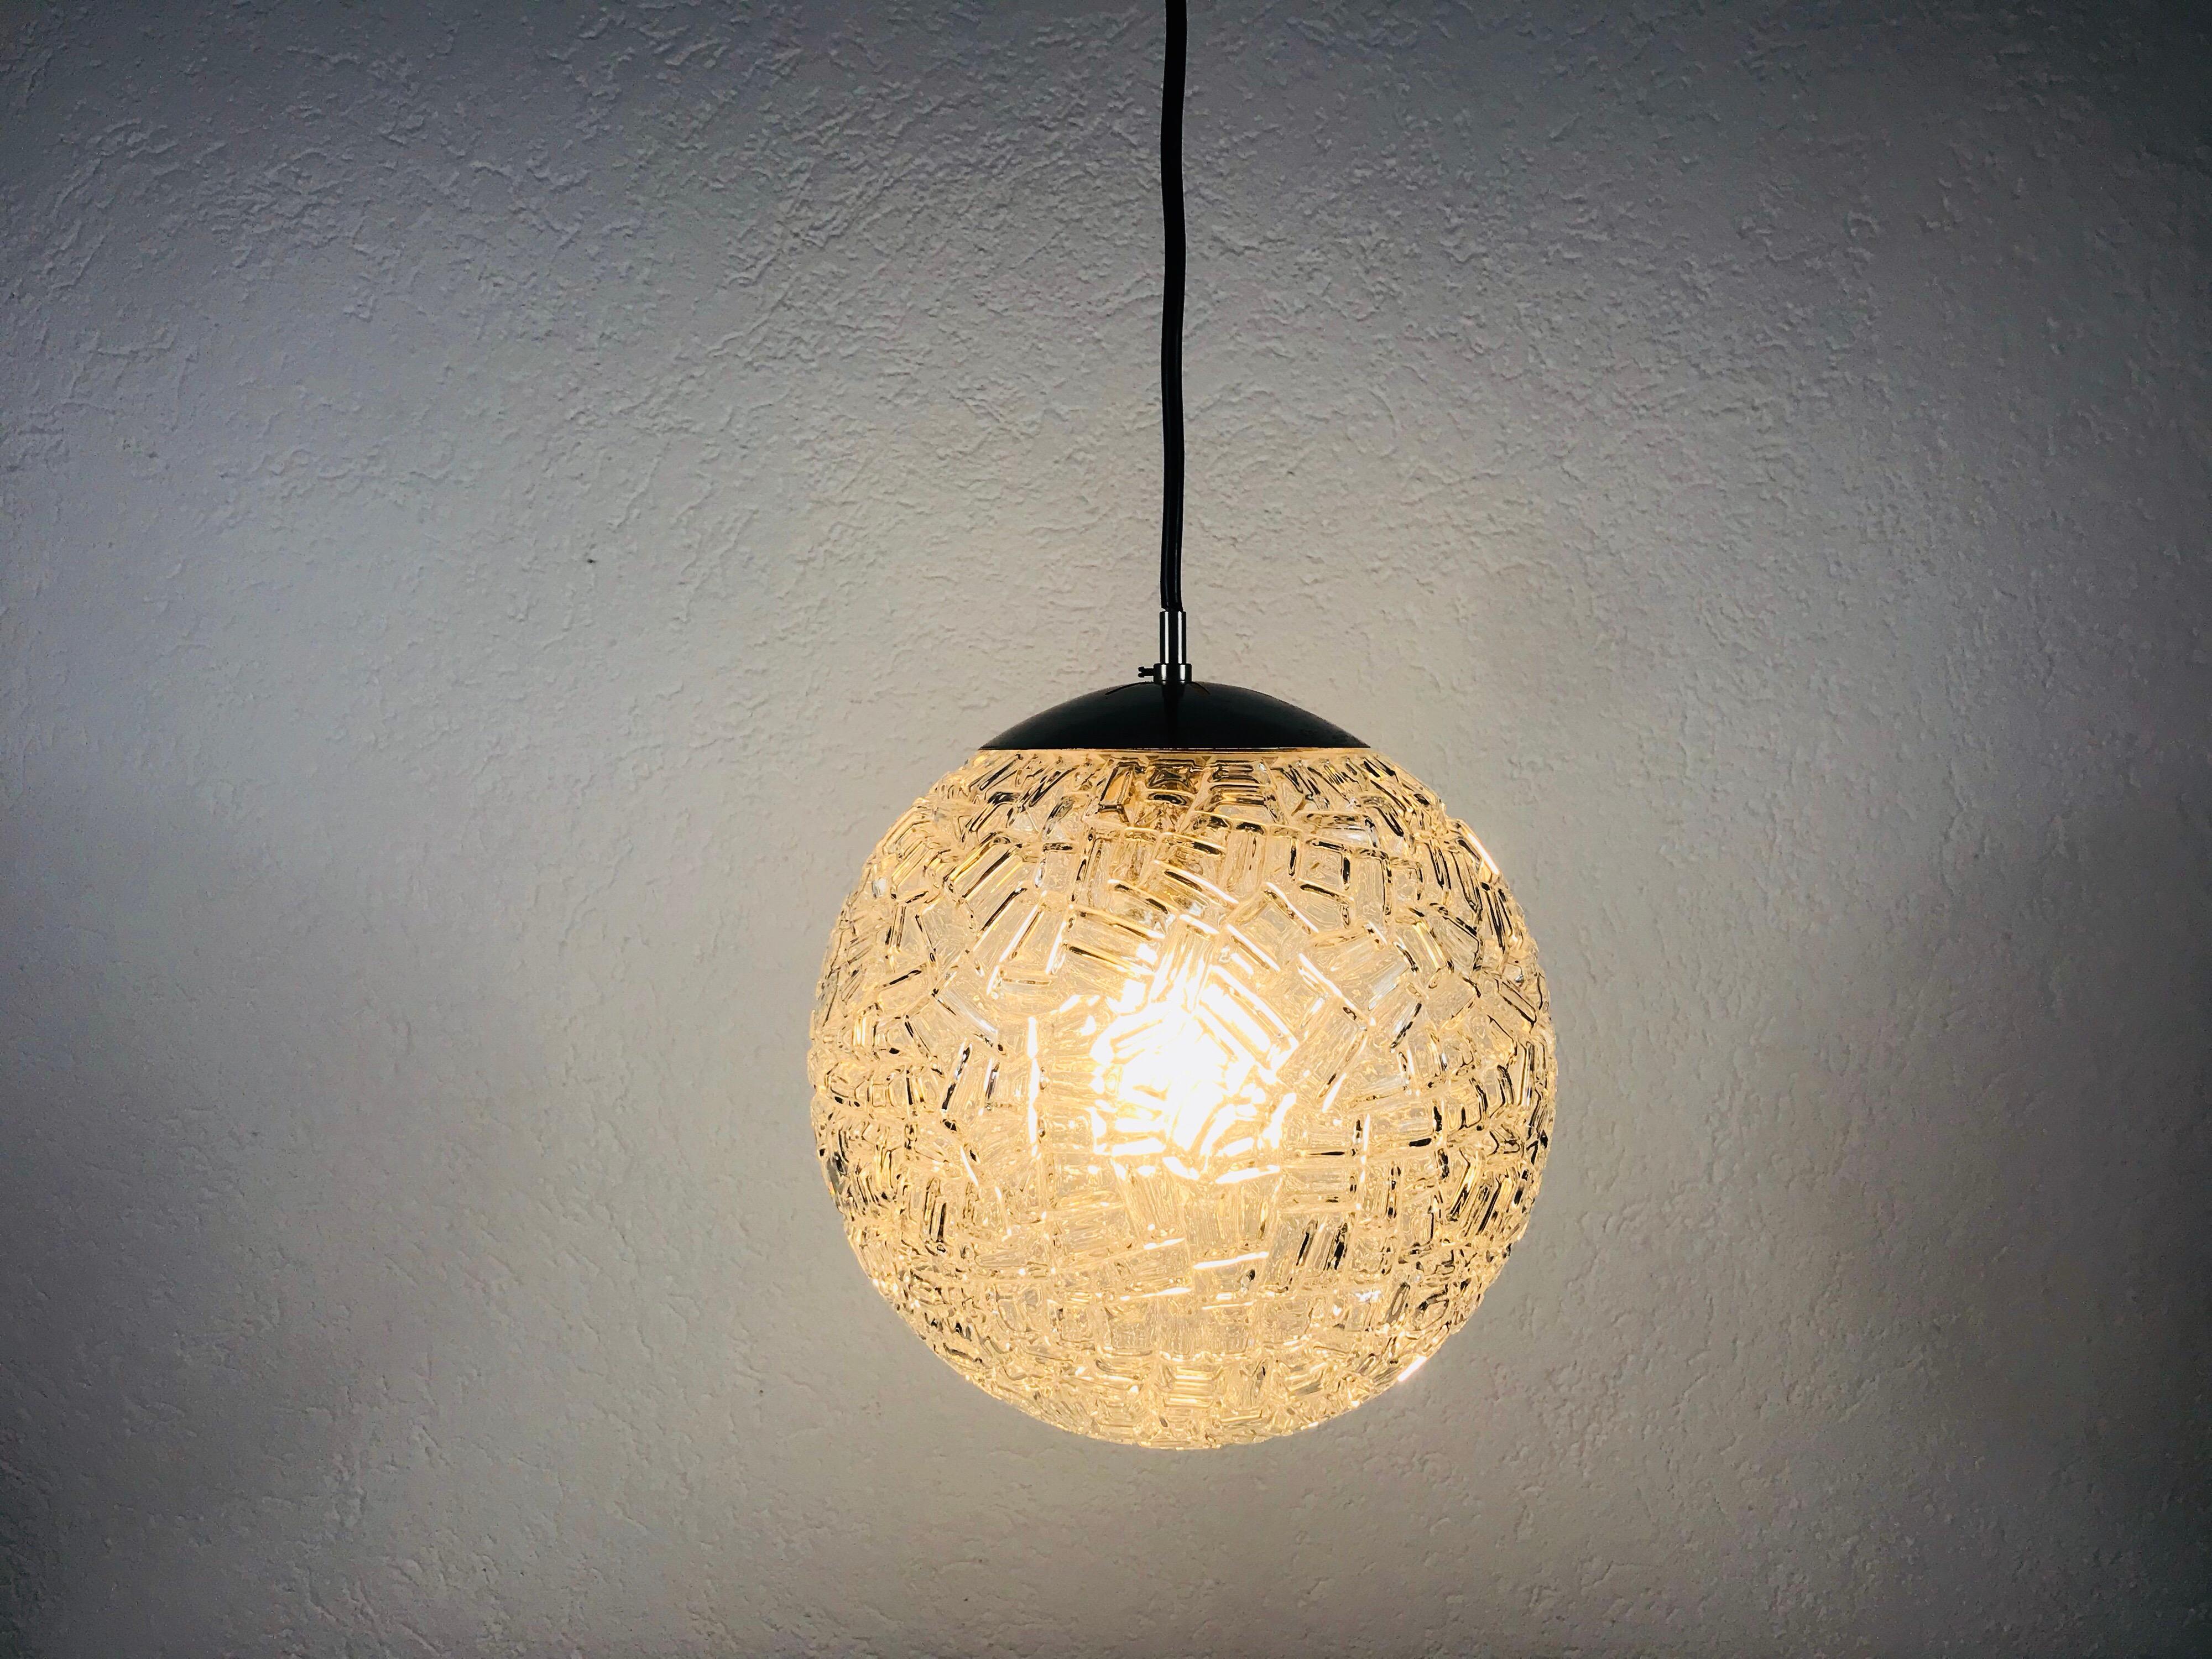 A beautiful glass bowl hanging lamp made in Germany in the 1970s. The light is made of Murano glass.

Measurements:

Height: 60 cm

Diameter: 20 cm

The light requires one E27 light bulb..